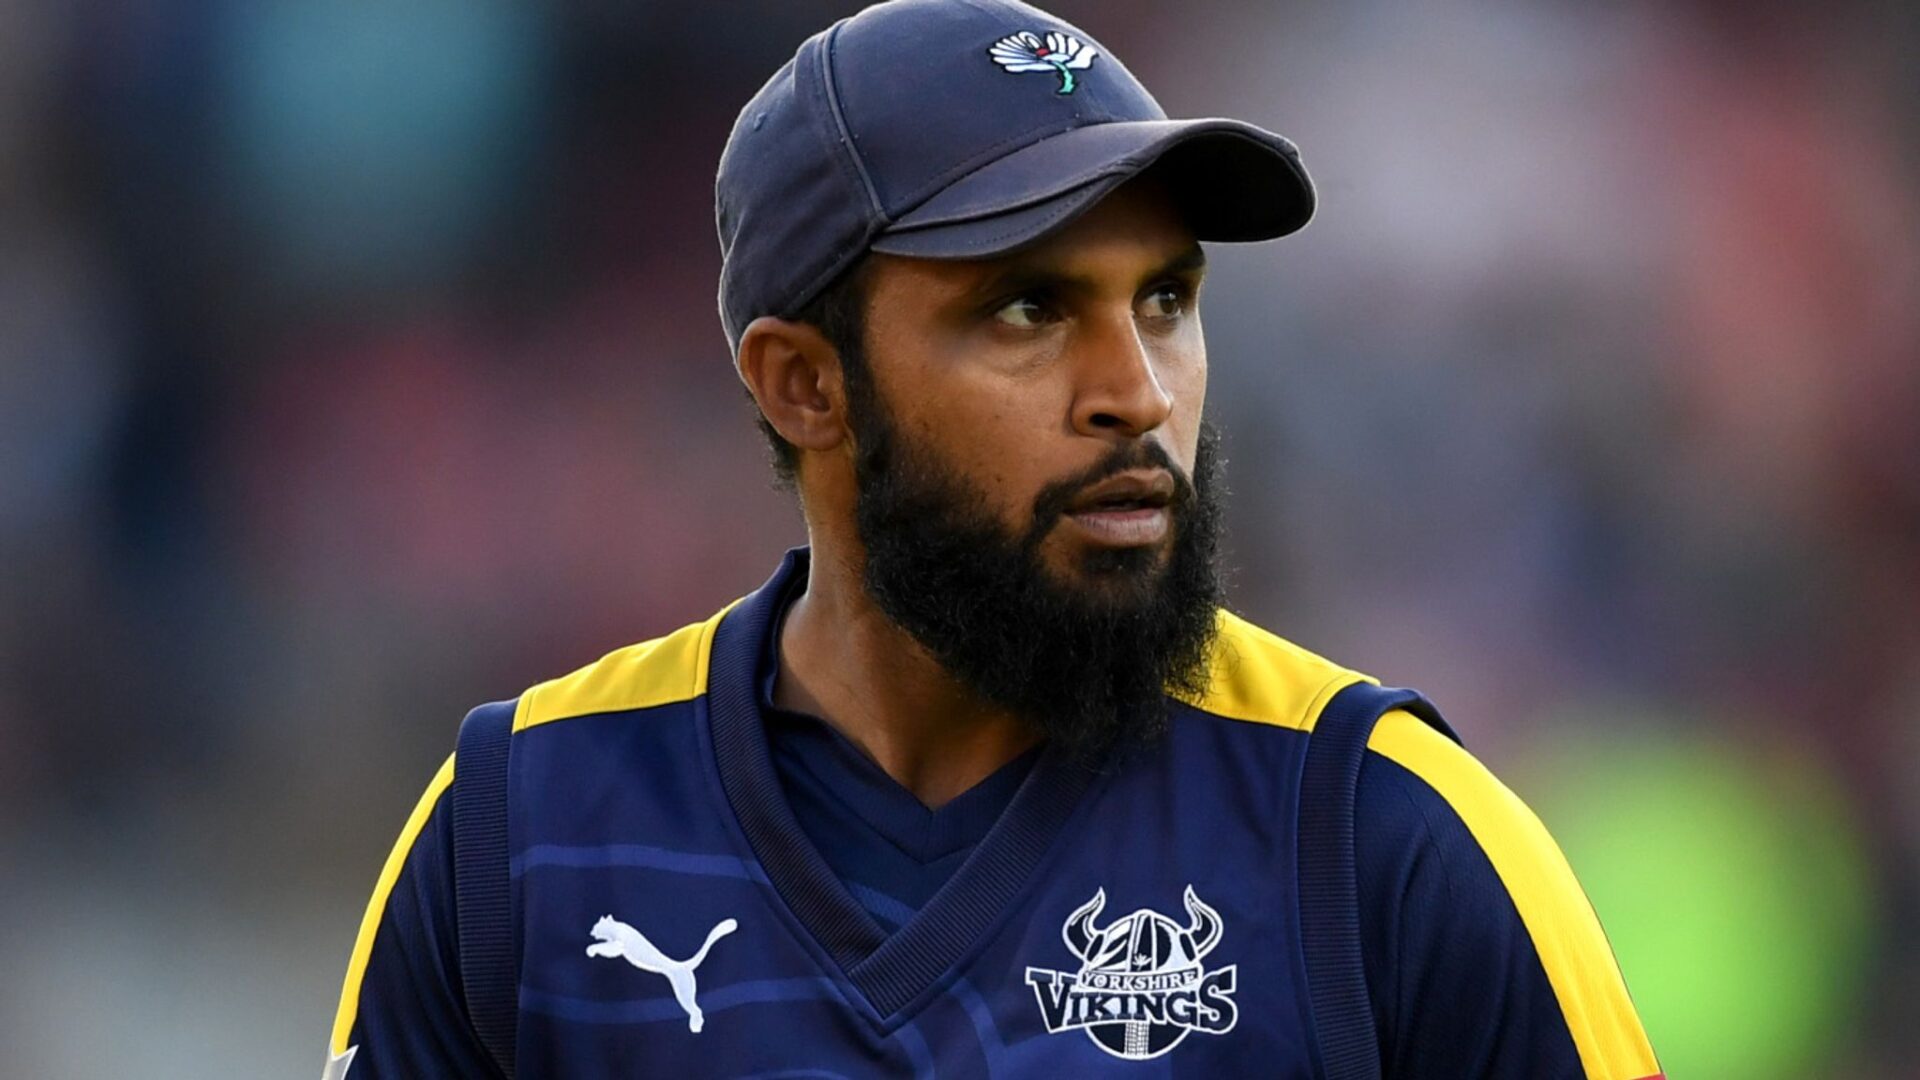 Michael Vaughan's racial comments on Azeem Rafiq confirmed by Adil Rashid -theentertainment.vision